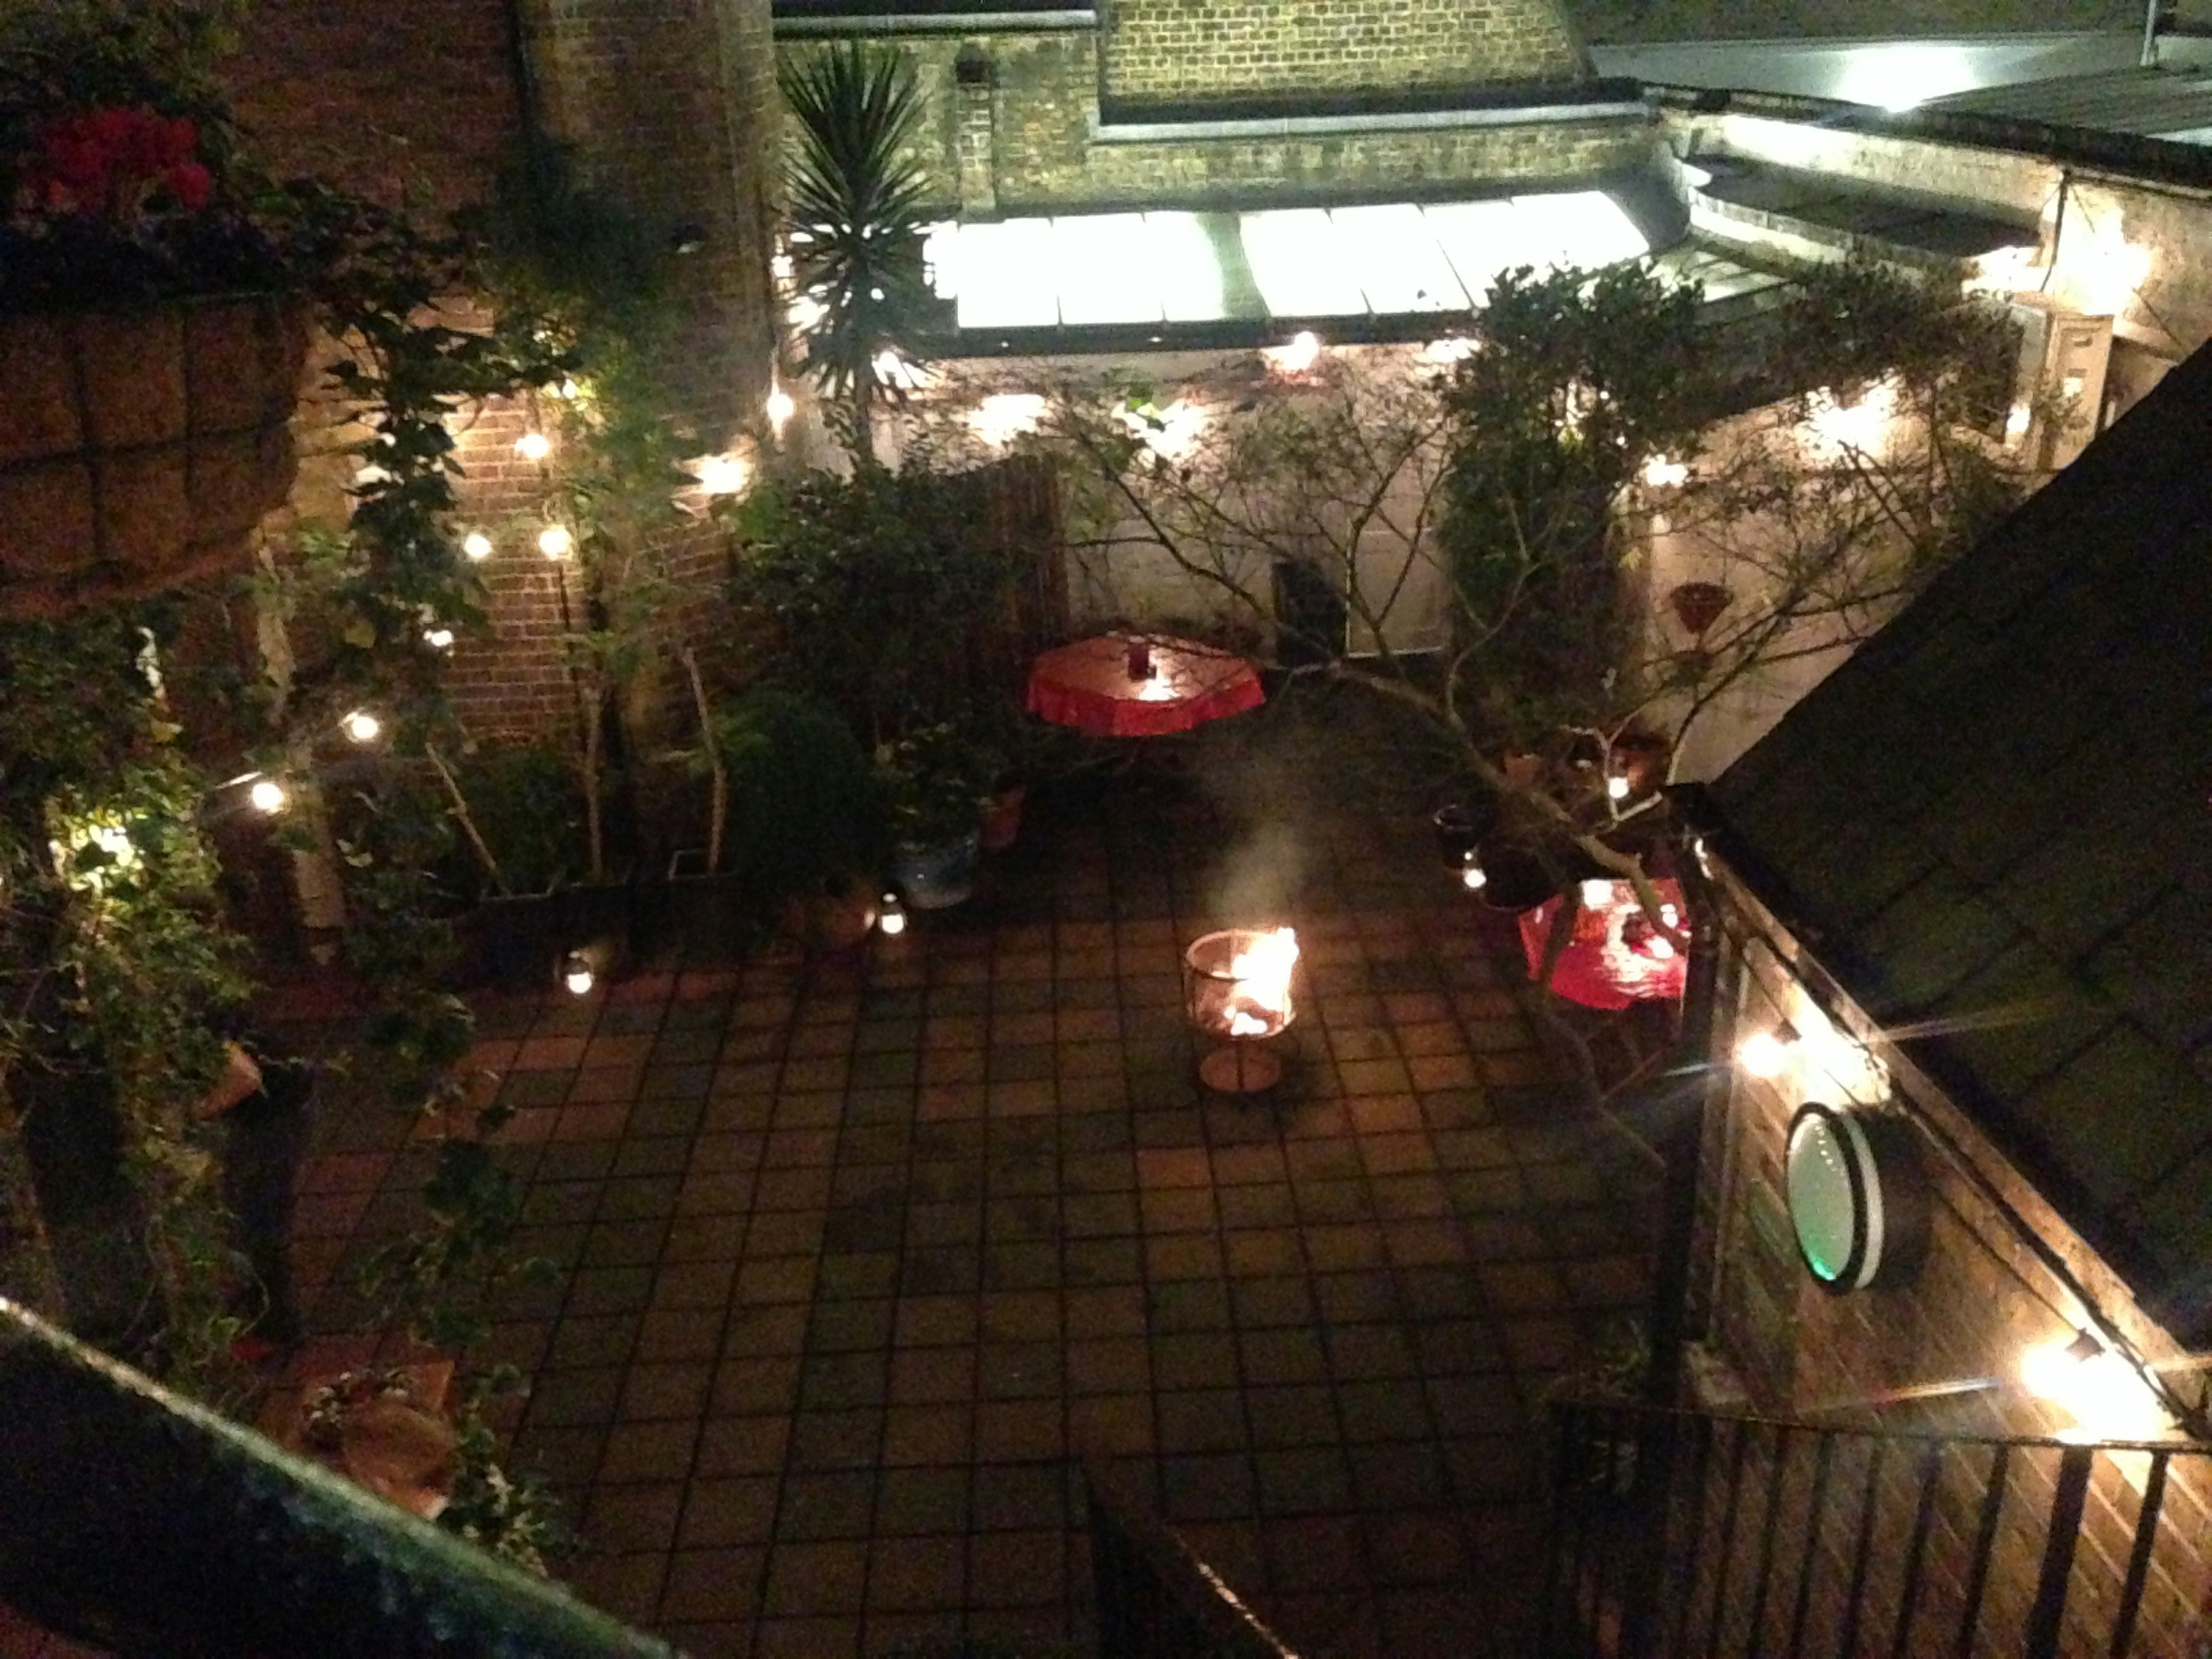 October Gallery - Gallery, Courtyard & Kitchen image 7